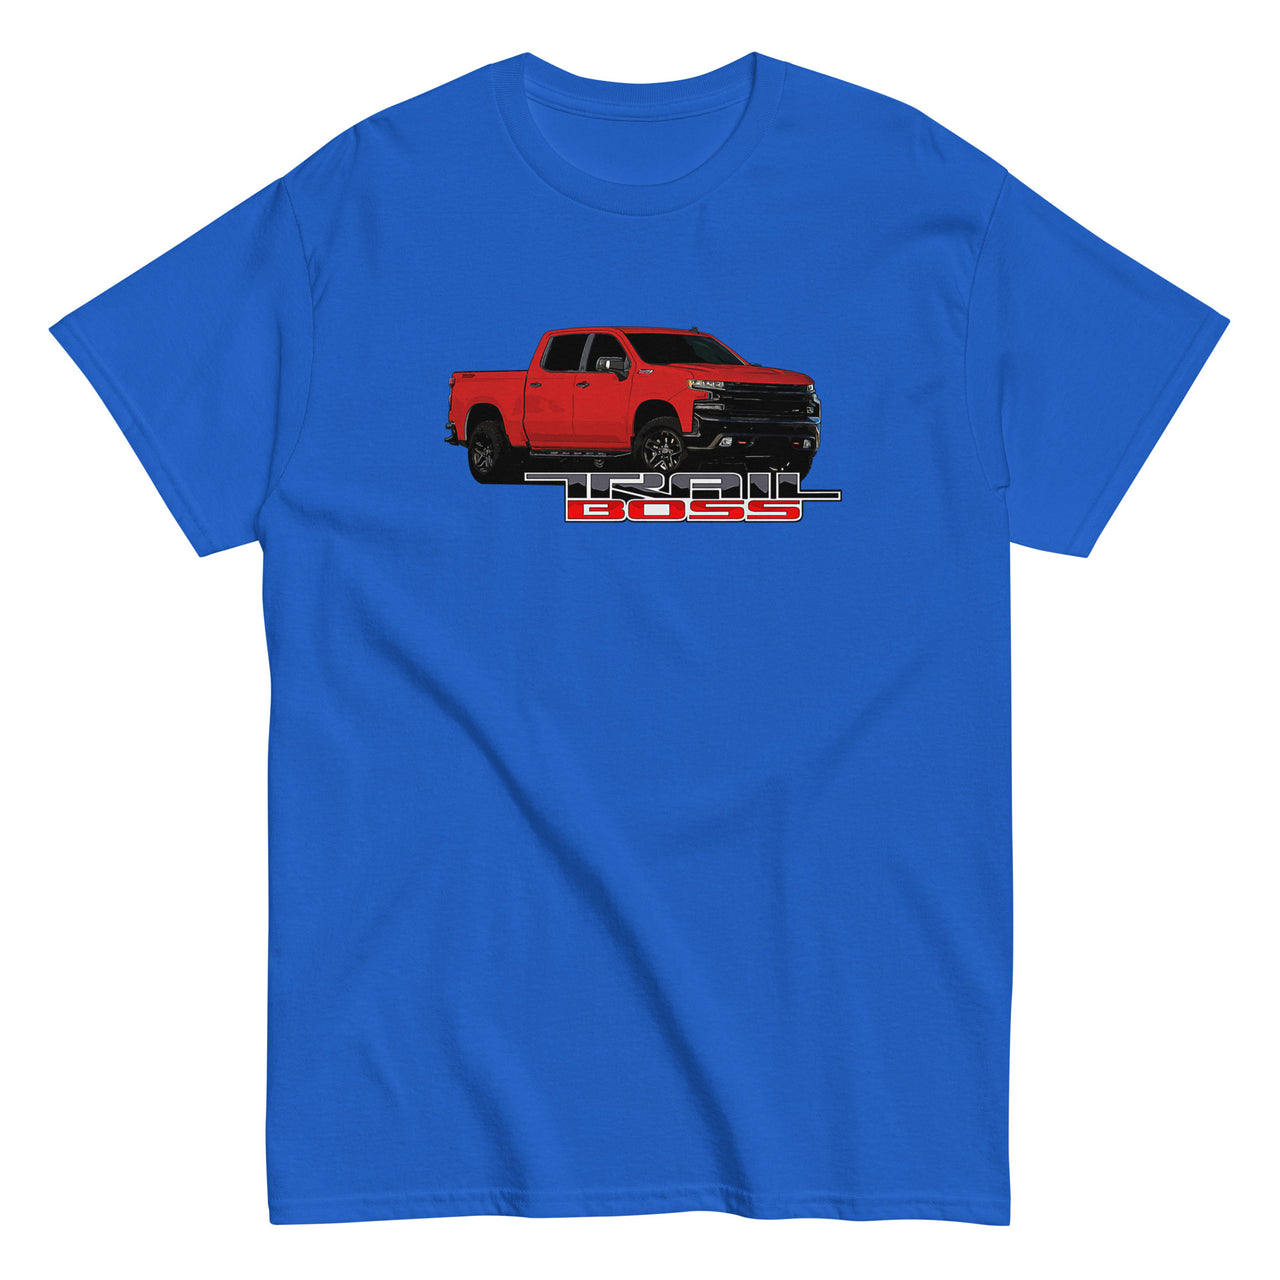 Red Trail Boss Truck T-Shirt in royal